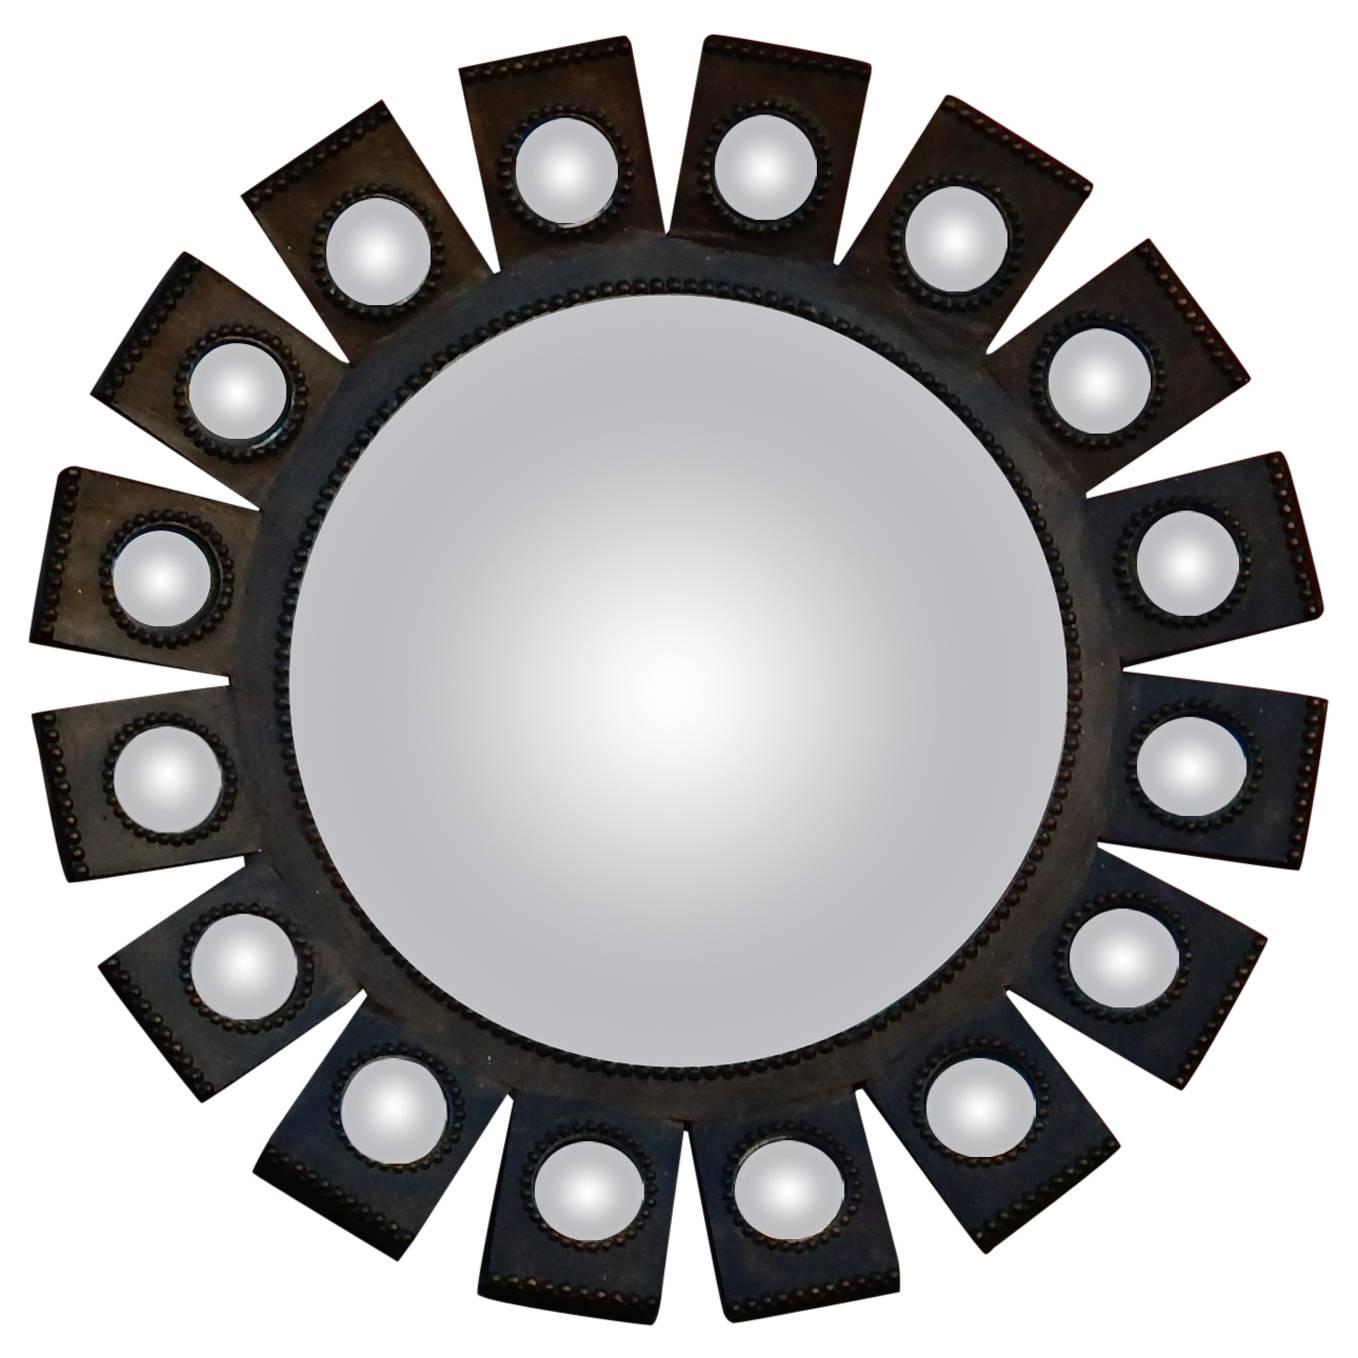 1970-1980 Convex Mirror with Its 16 Small Convex Mirrors